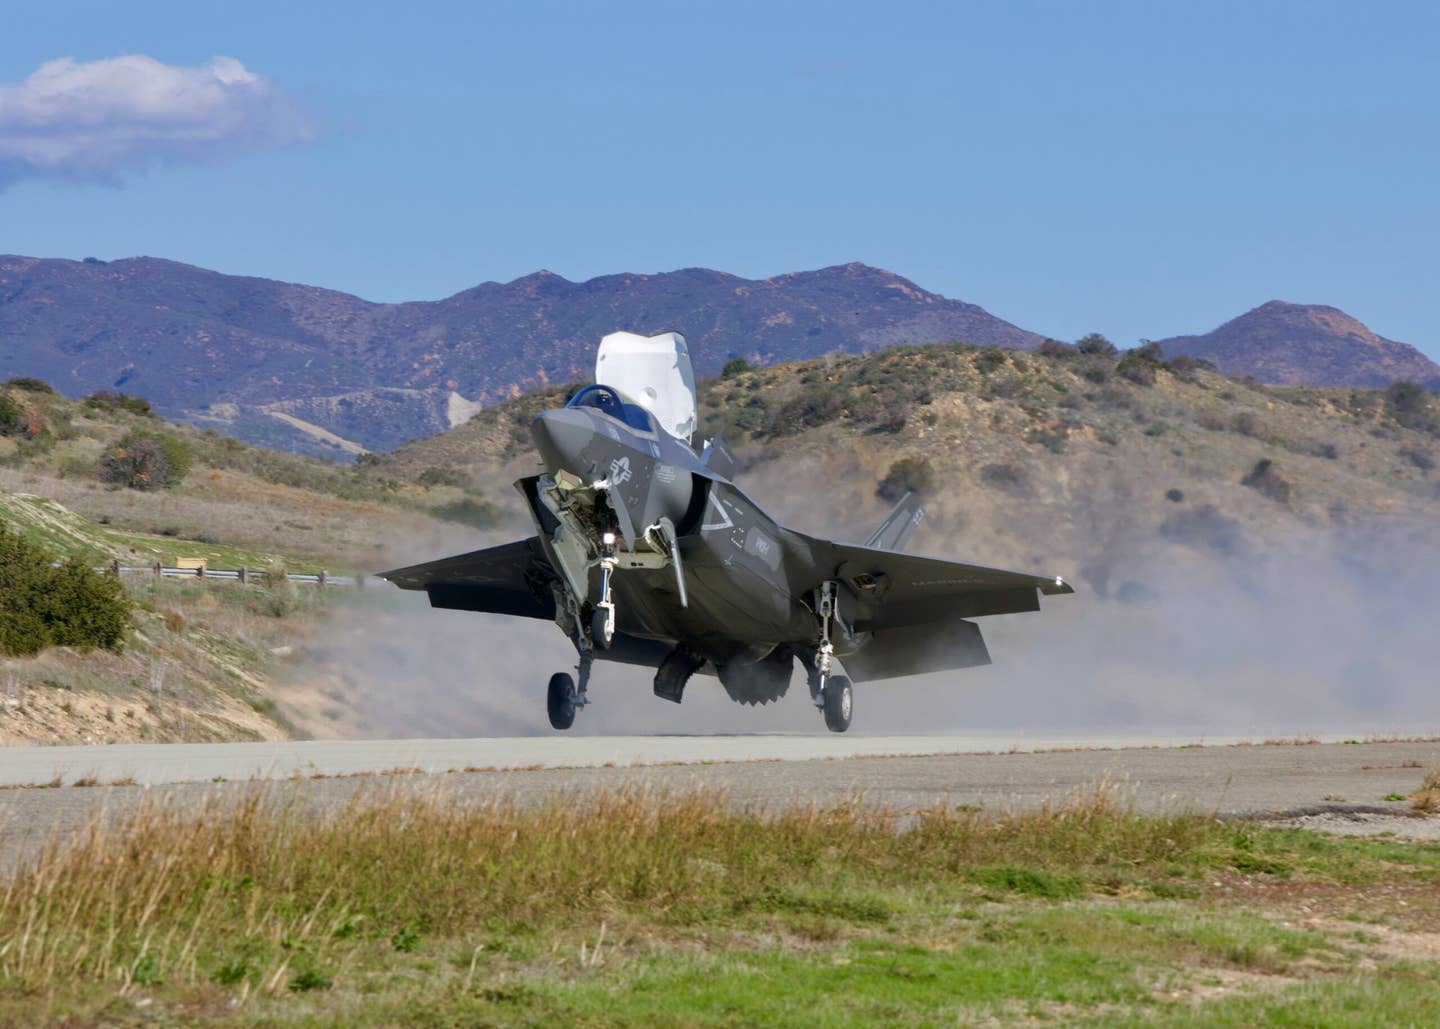 F-35Bs landing at the HOLF. (Author's image)